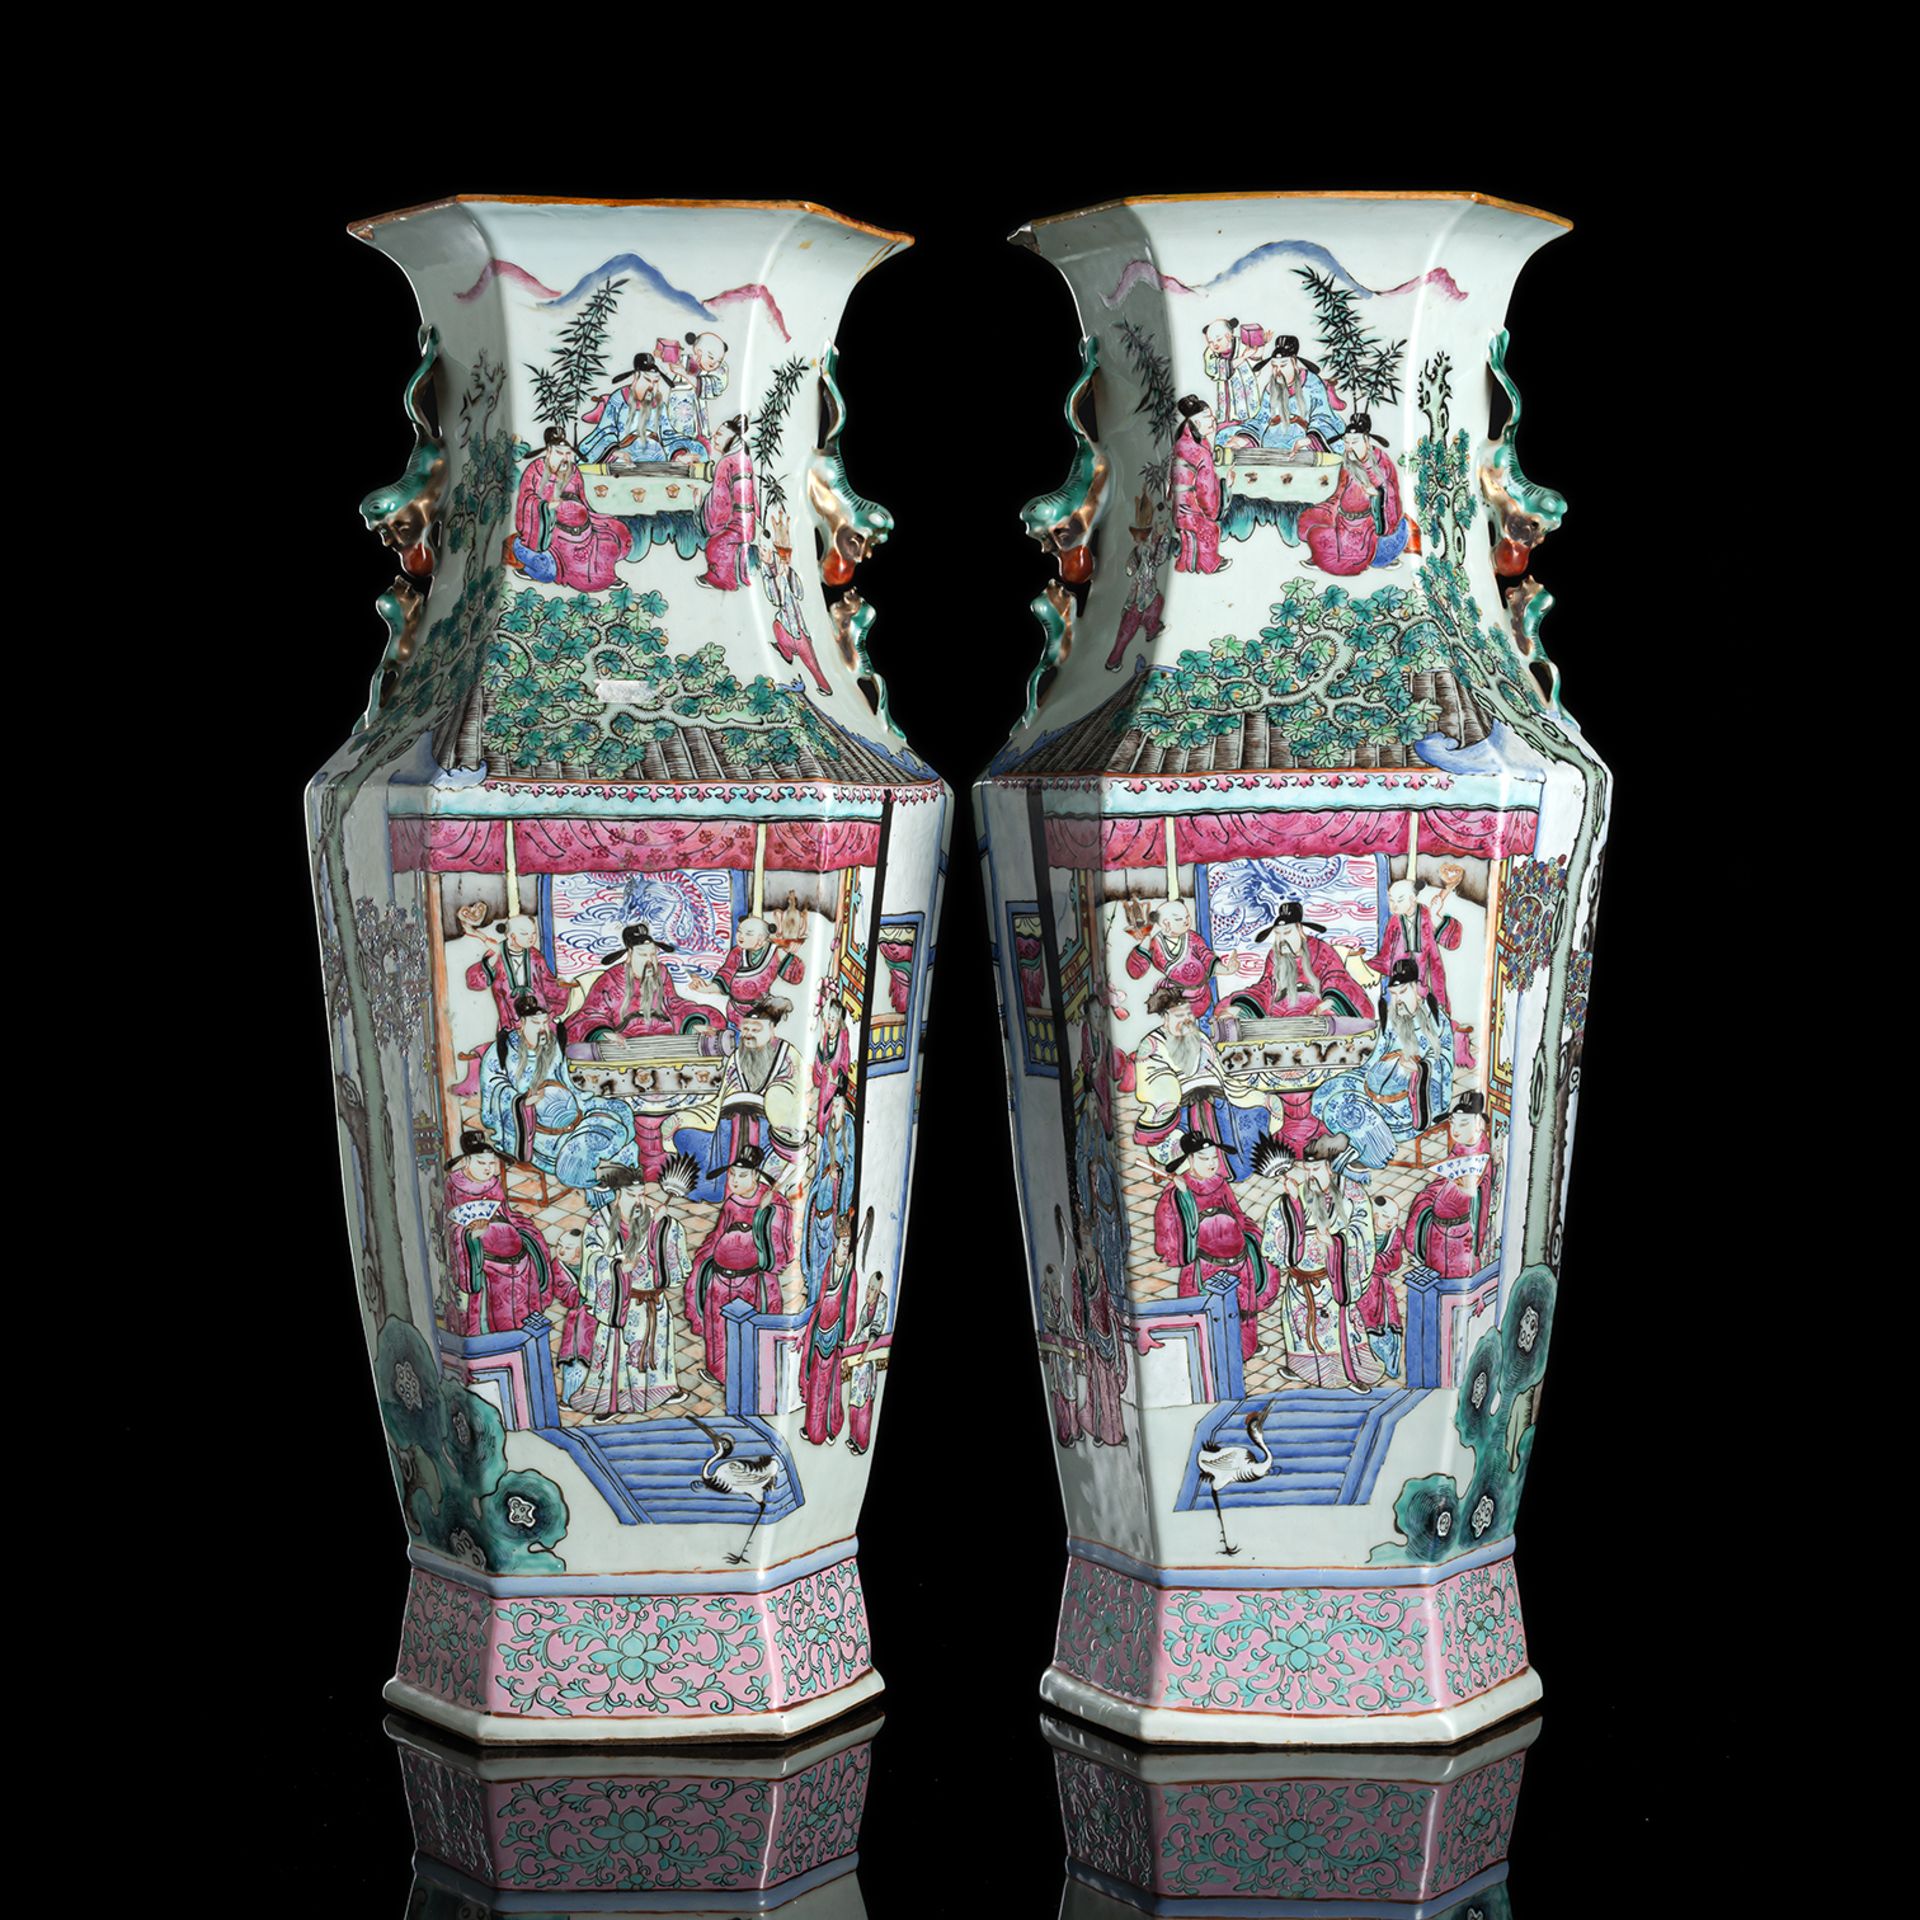 A PAIR OF HEXAGONAL 'FAMILLE ROSE' FIGURAL PORCELAIN VASES WITH FO-LION-HANDLES